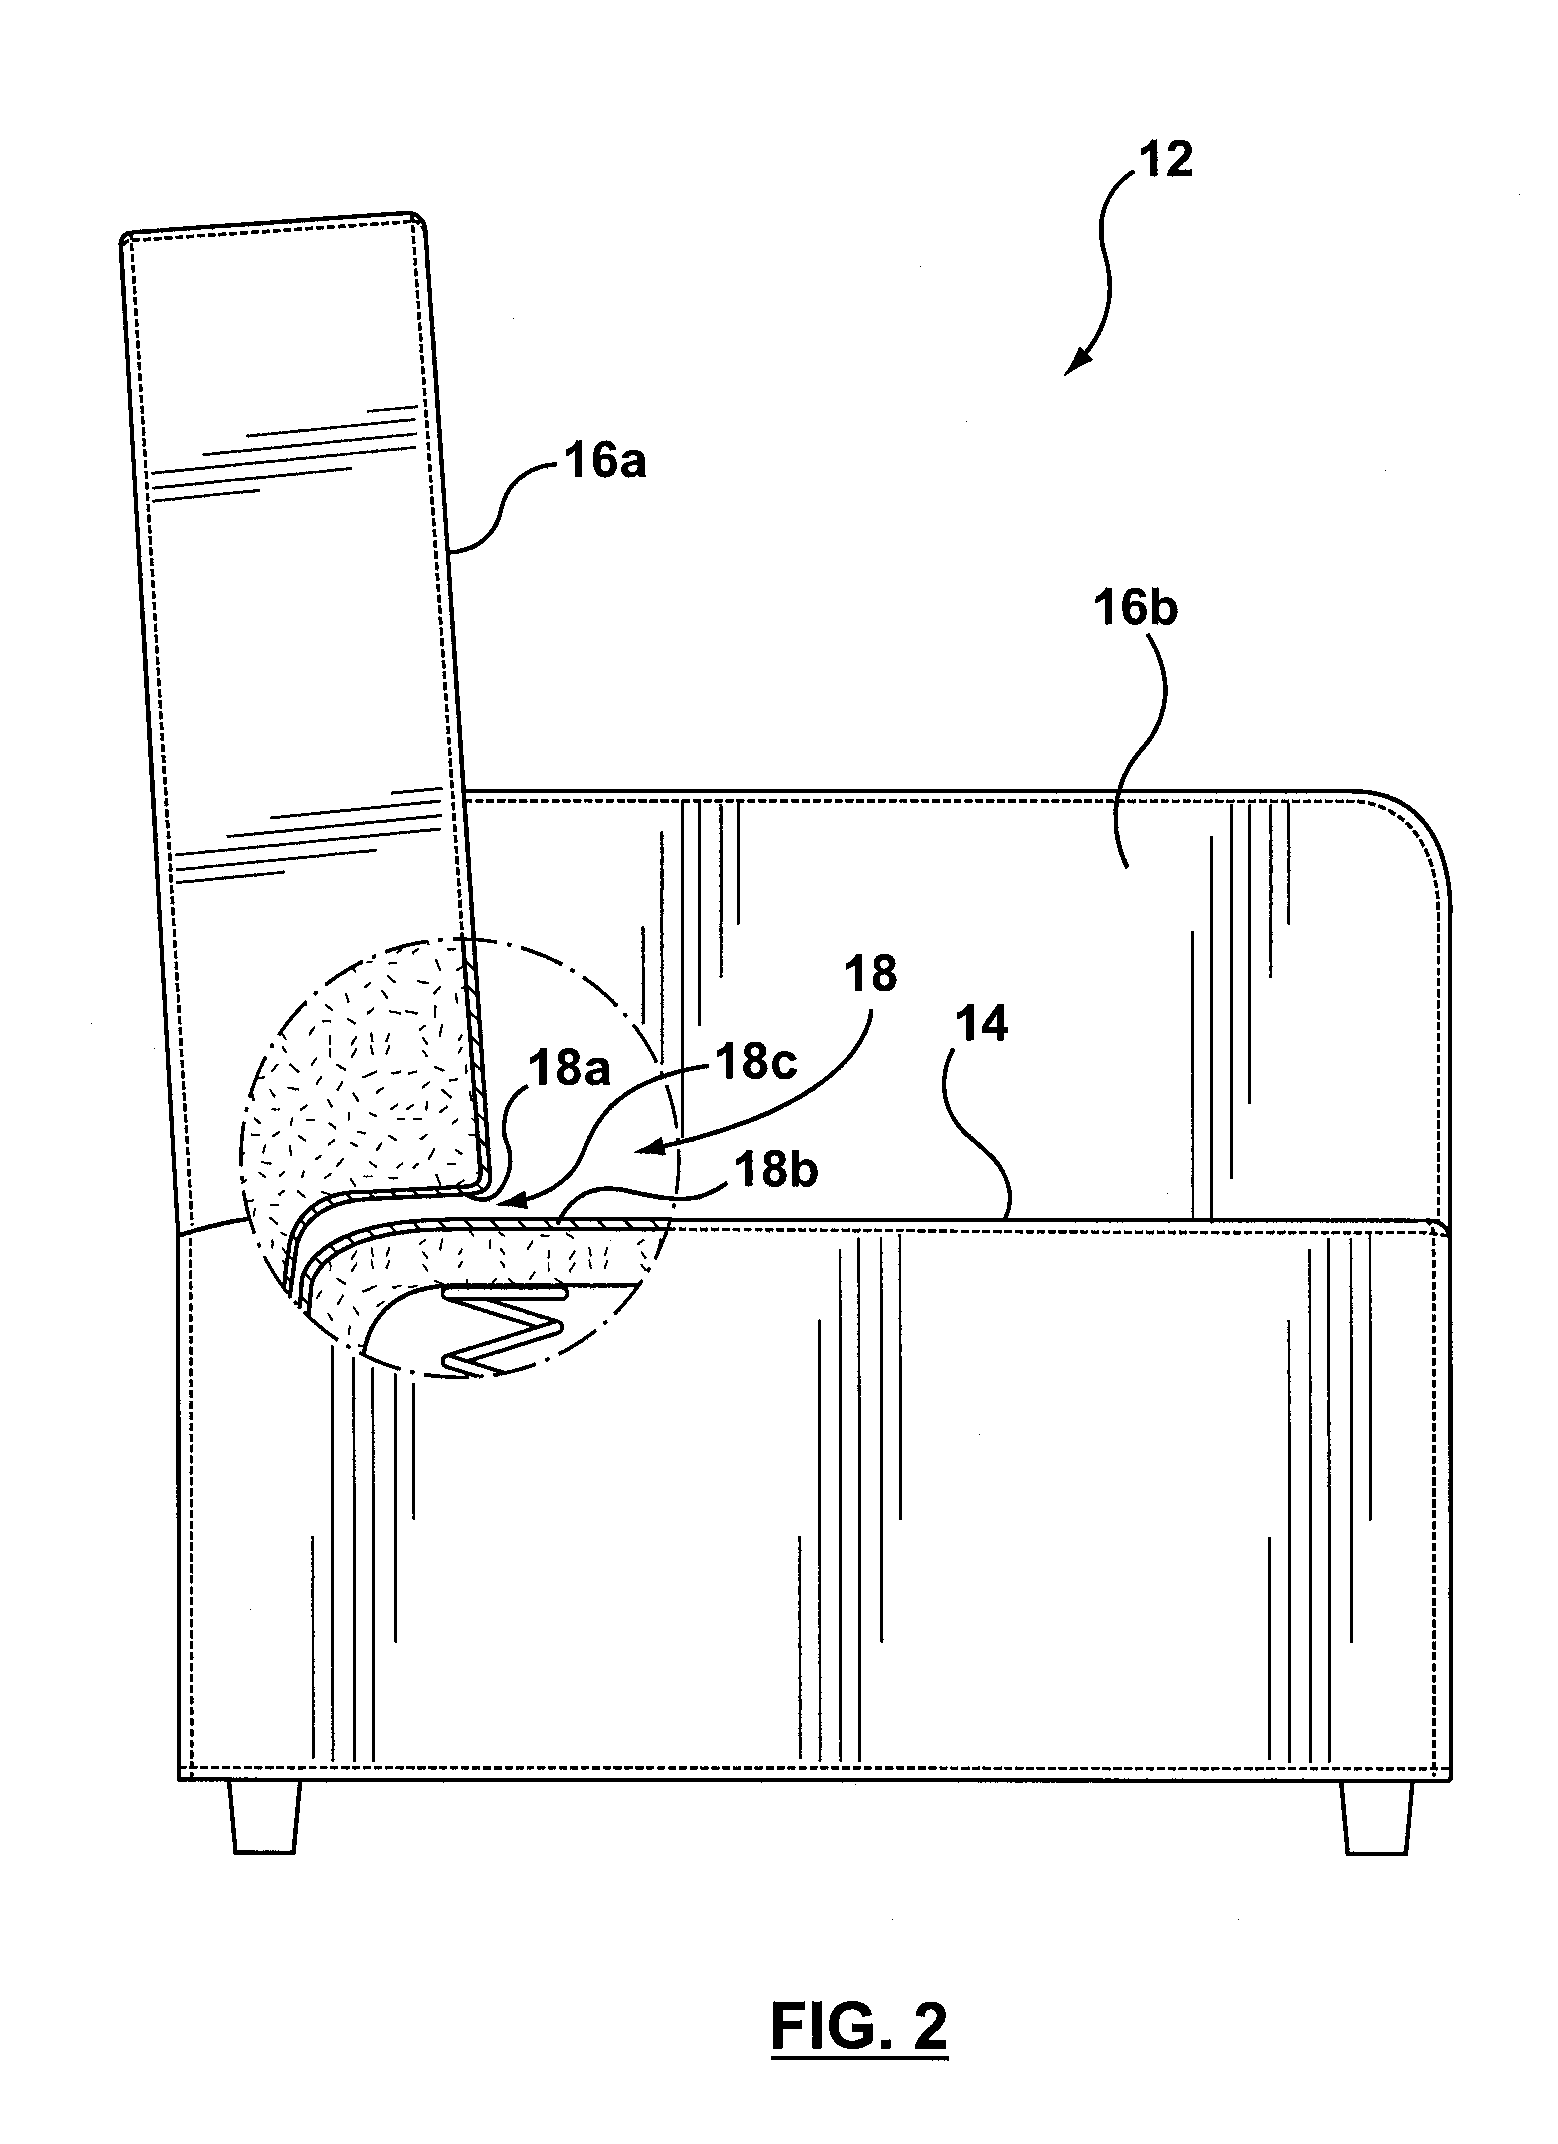 Catching device for use with upholstered furniture